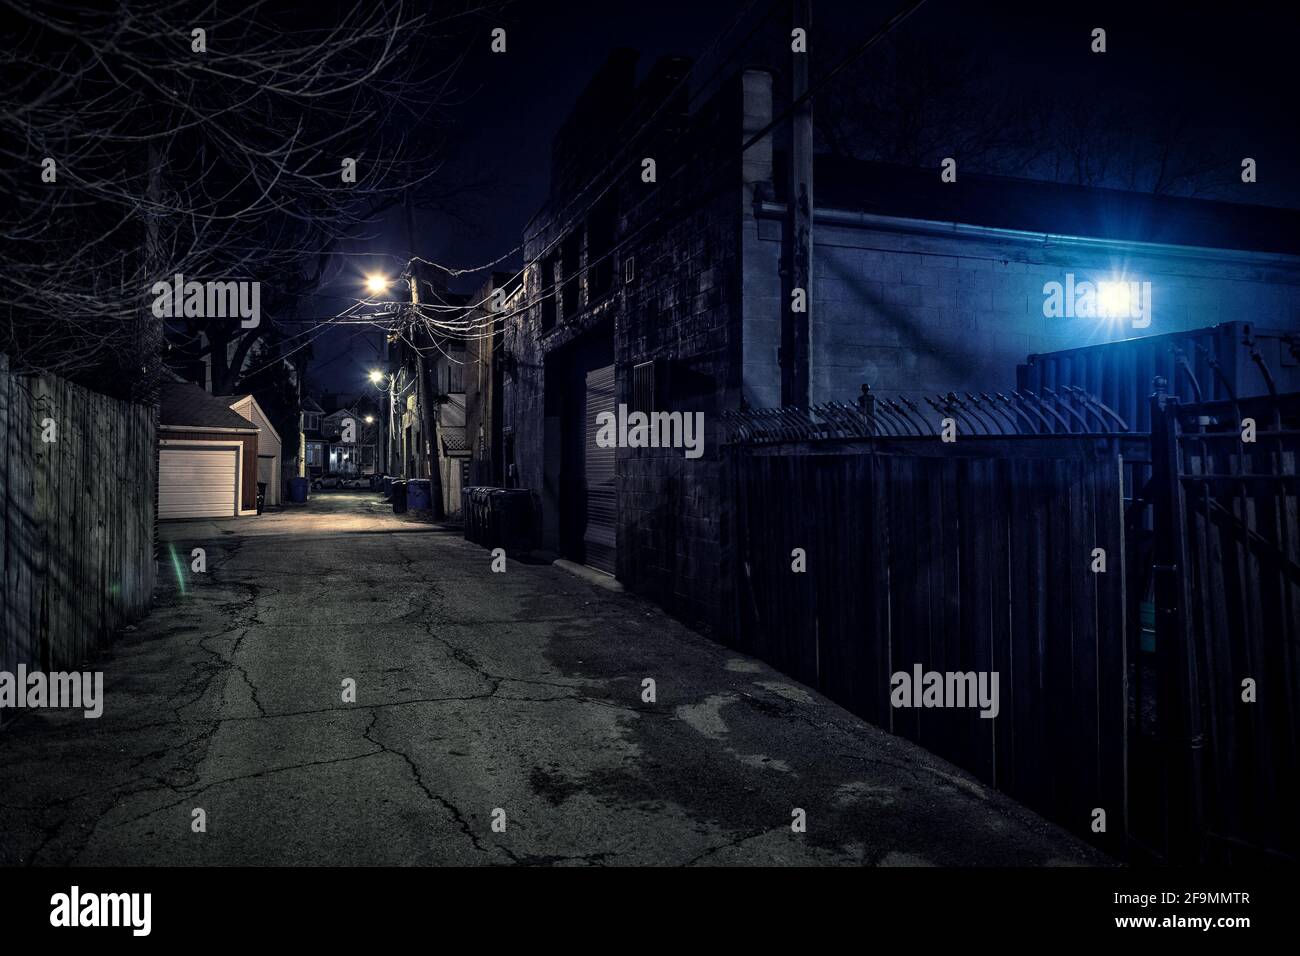 Page 17 Dark Alleyway At Night High Resolution Stock Photography And Images Alamy